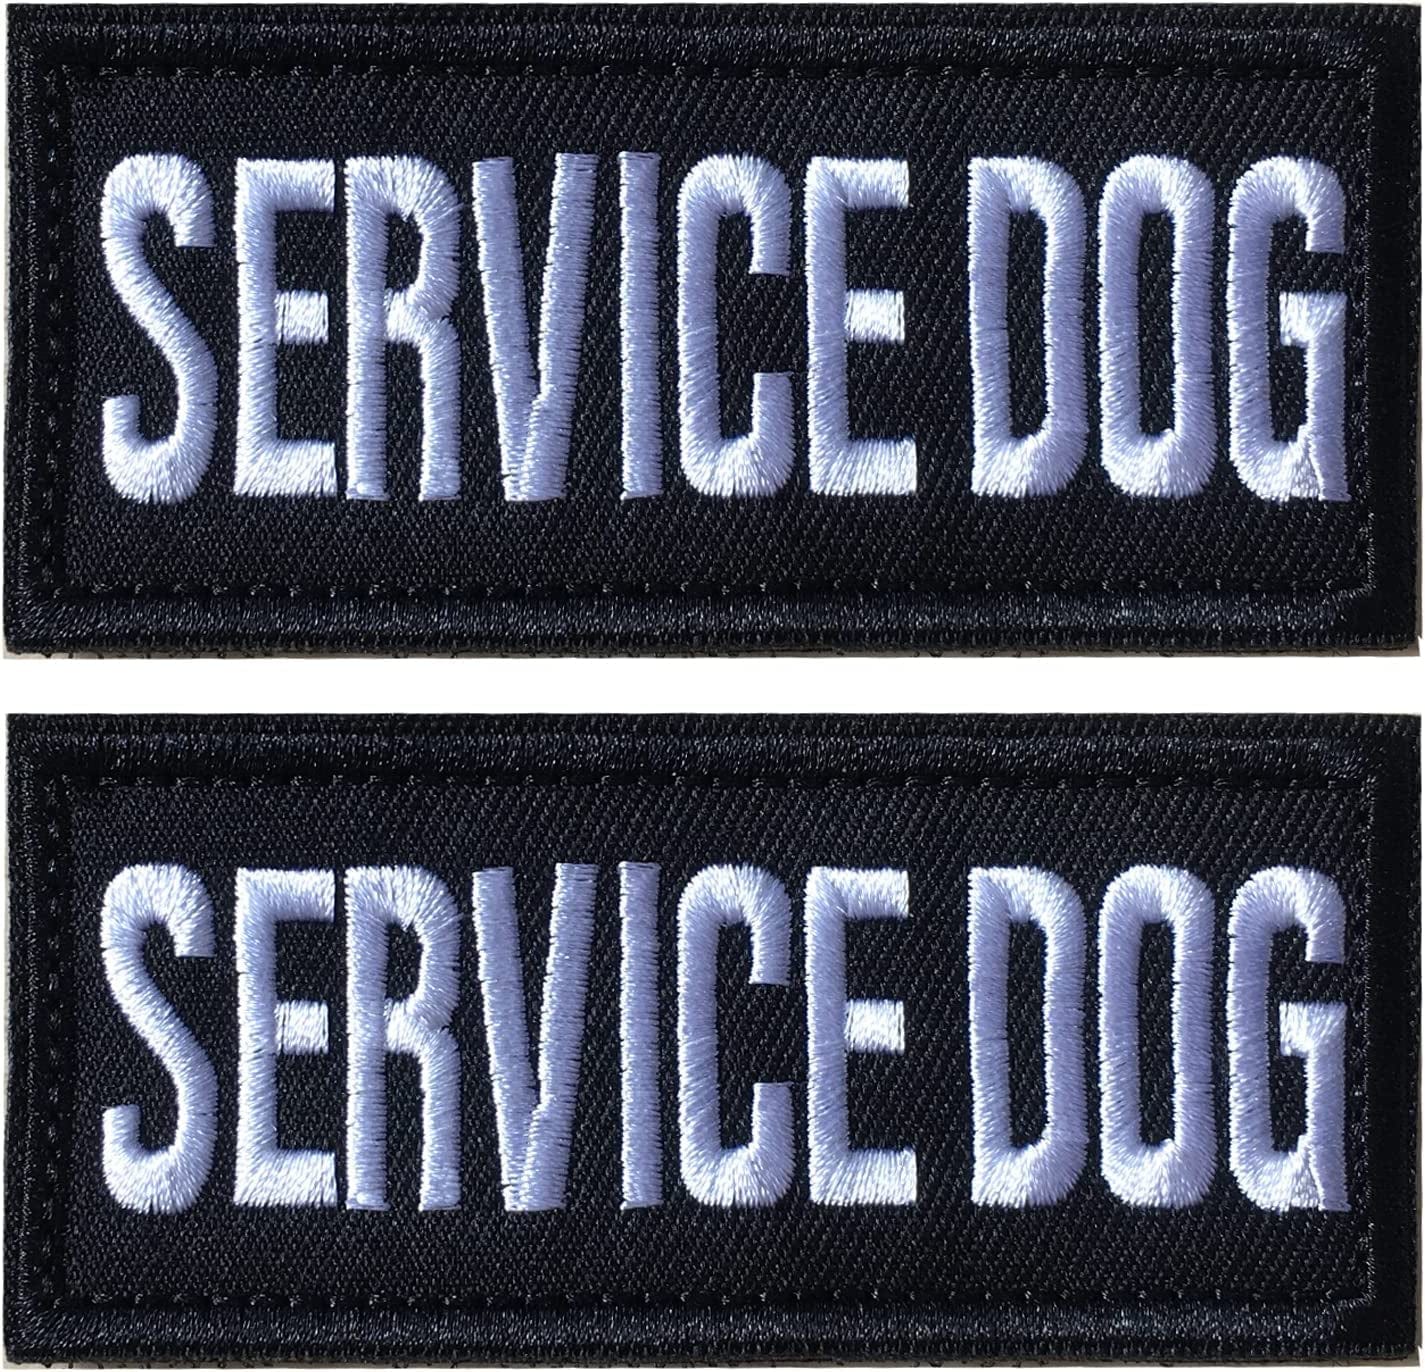 GYGYL 12Pcs Service Dog Patches, Ask to Pet Do Not Pet Patch, Tactical Pet  in Training, Embroidered Fastener Hook and Loop Patch for Dog Vest